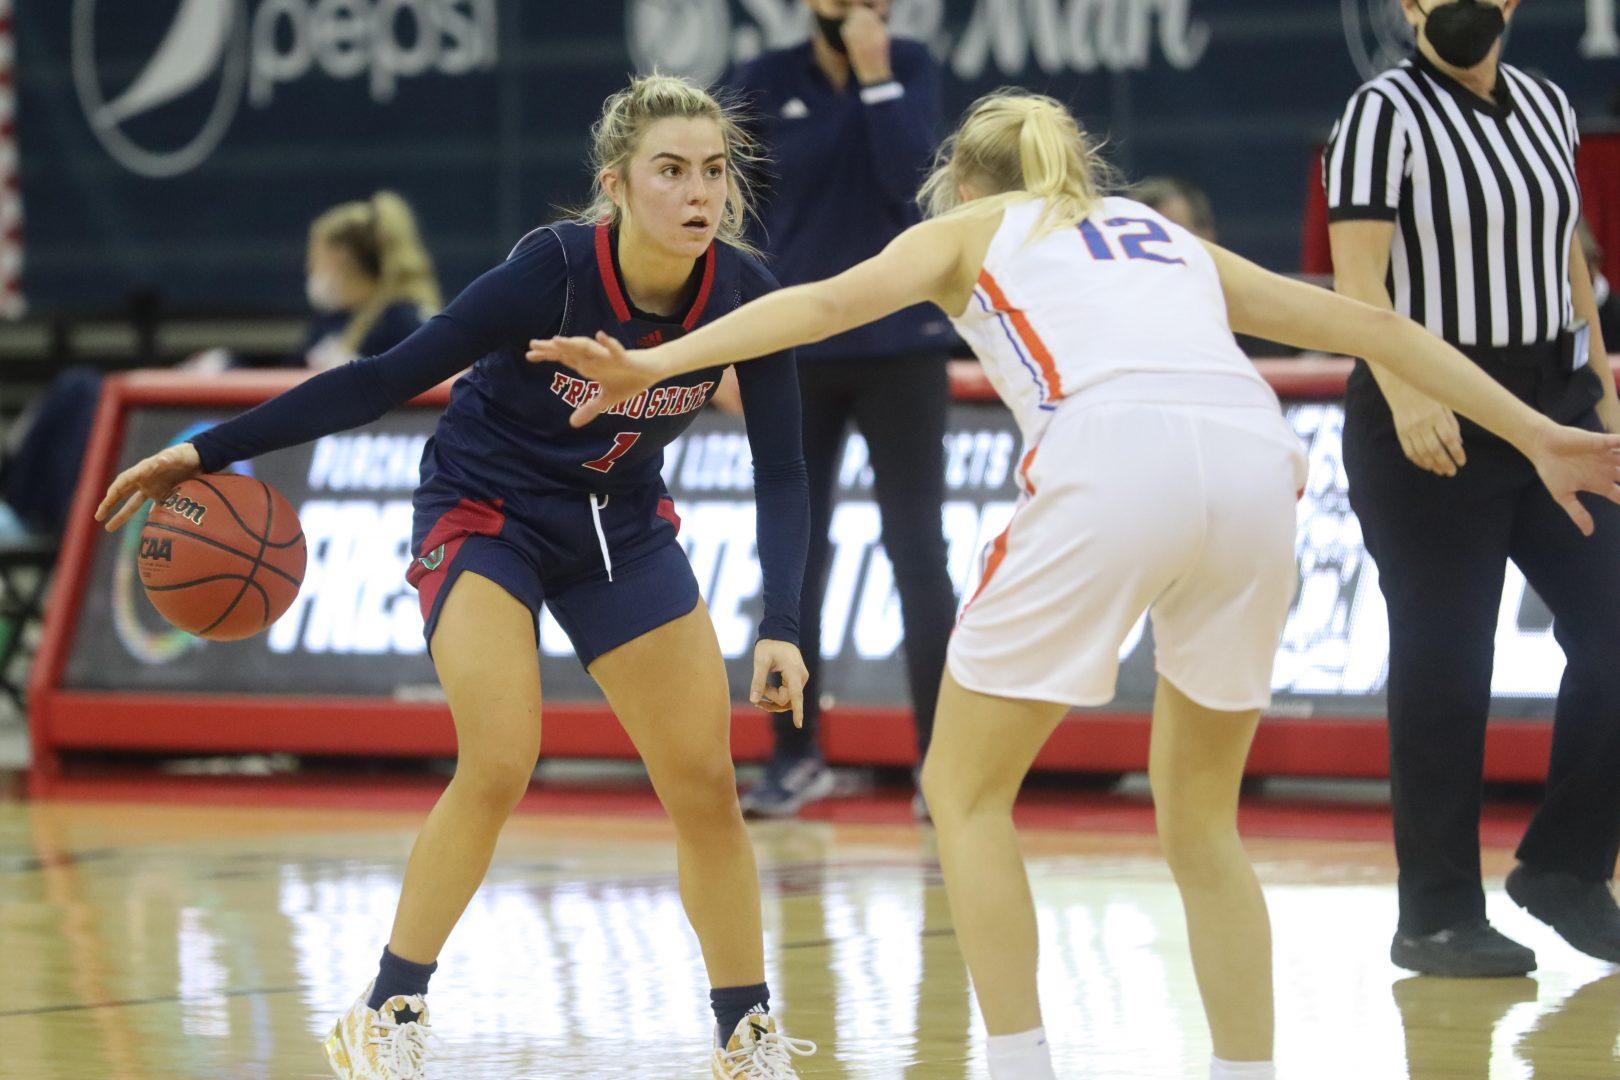 Fresno State Guard Haley Cavinder (1) brings the ball down the court during the second quarter of the game against Boise State on Jan. 21, 2021, at the Save Mart Center. (Kameron Thorn/ The Collegian)